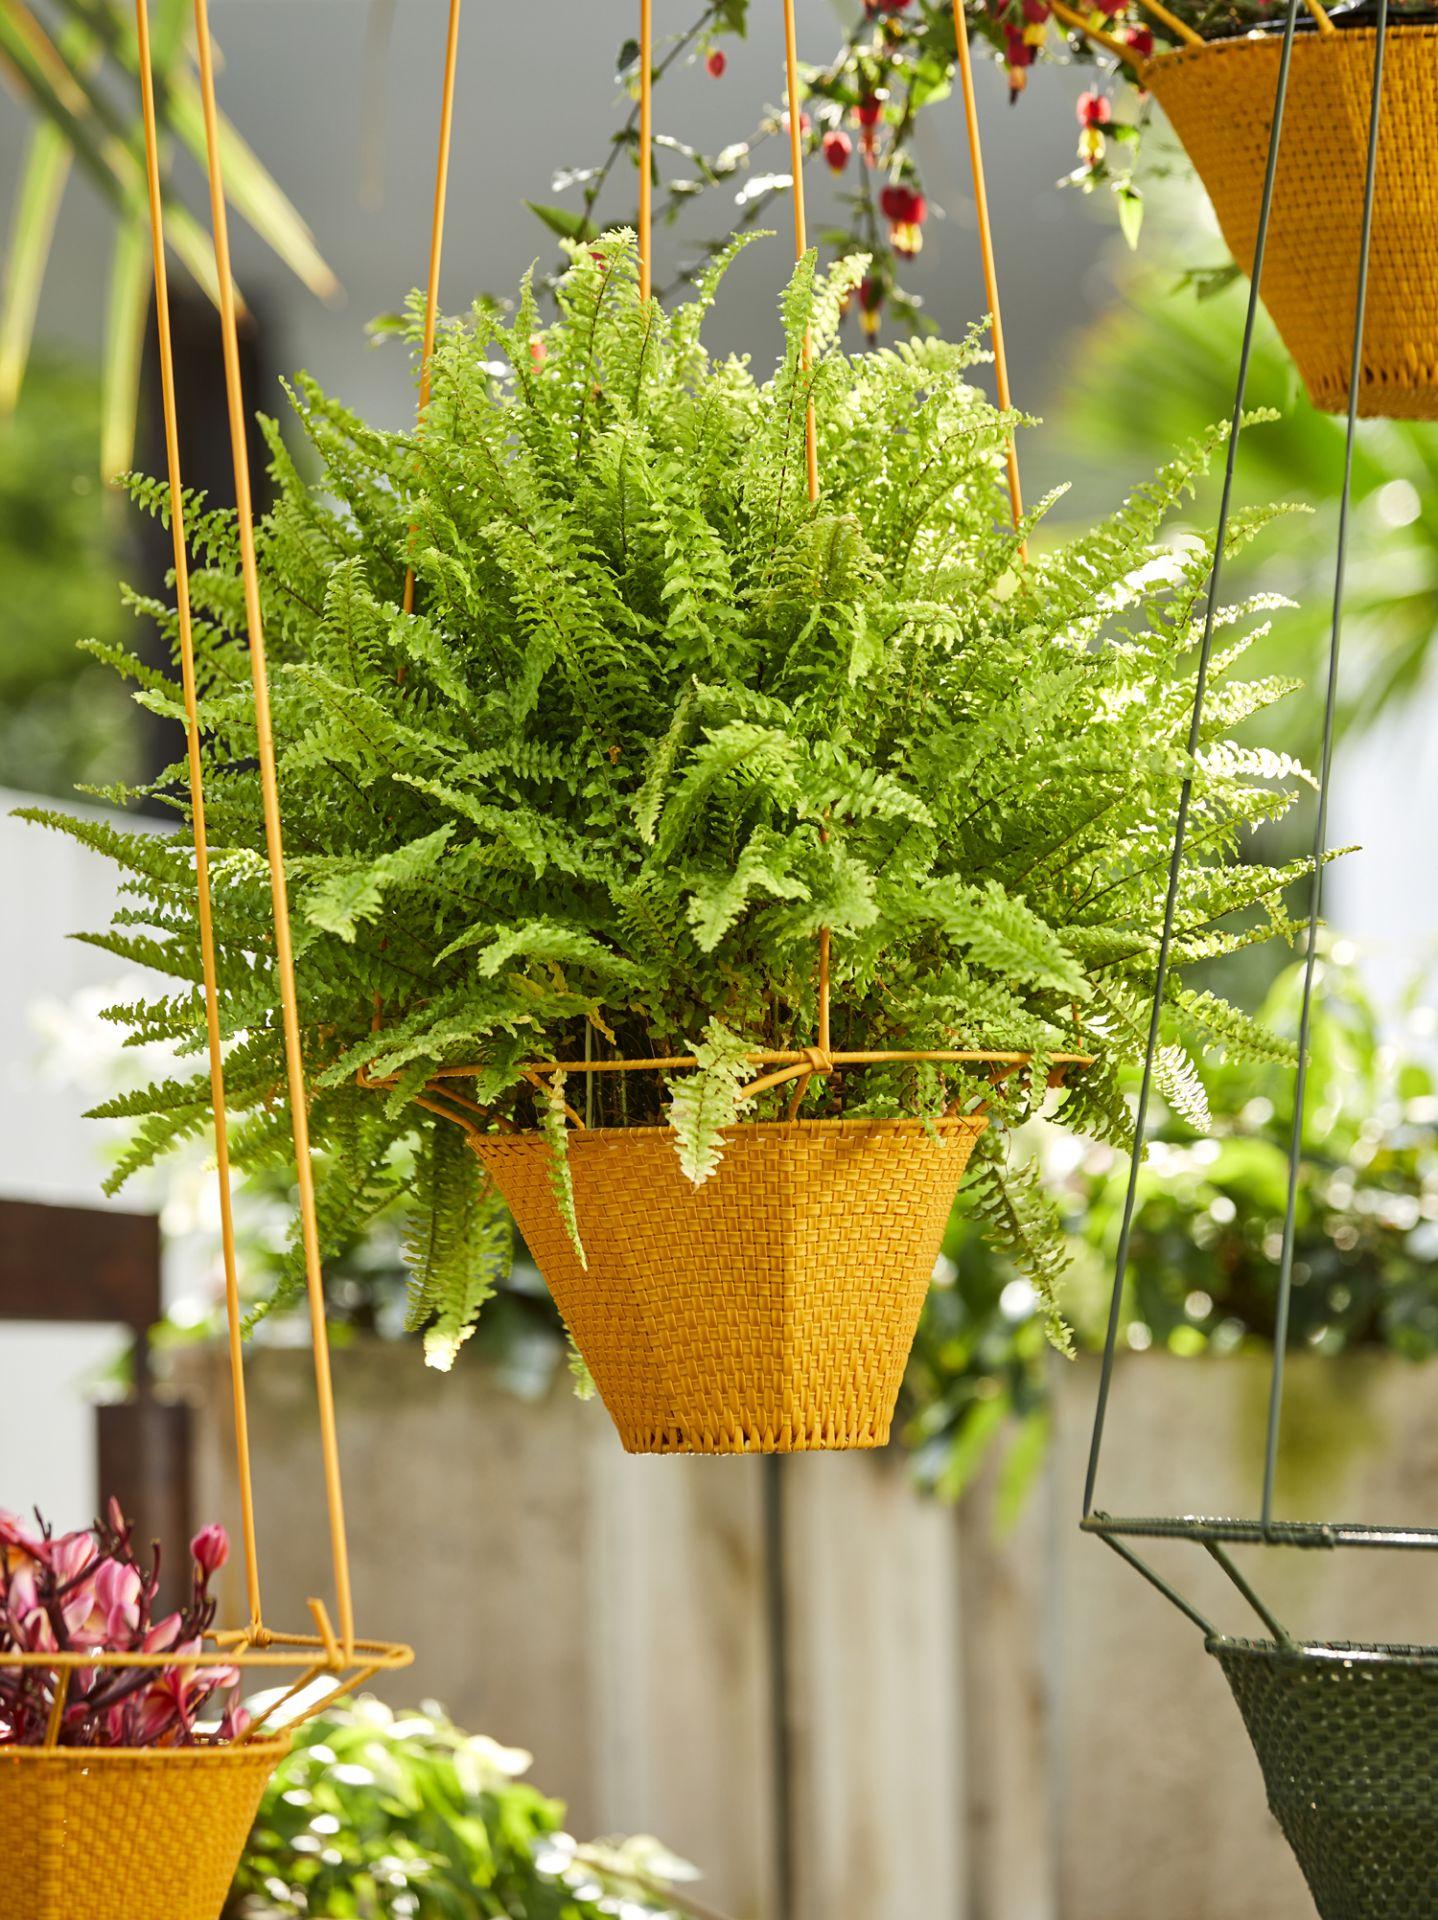 Large dichas hanging planter by Cristina Celestino. 
Materials: PVC strings made from recycled plastic
Dimensions: D 60 x H 21 cm 
Available in colors: black red, honey yellow, olive green. Available in other size.

The Dichas Hanging Planters